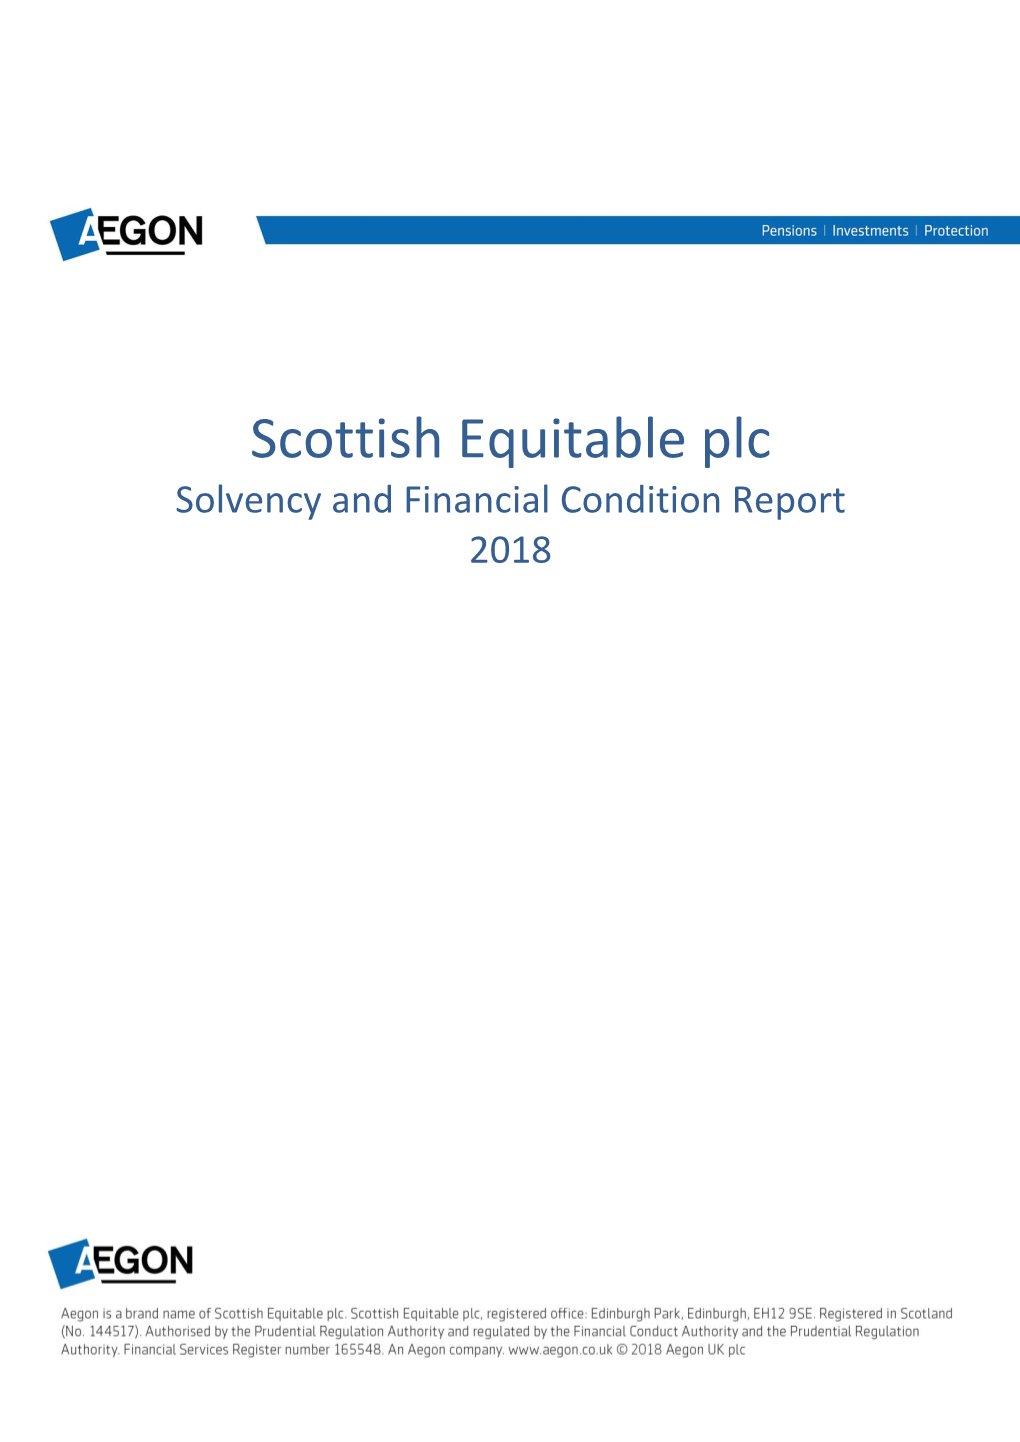 Scottish Equitable Plc Solvency and Financial Condition Report 2018